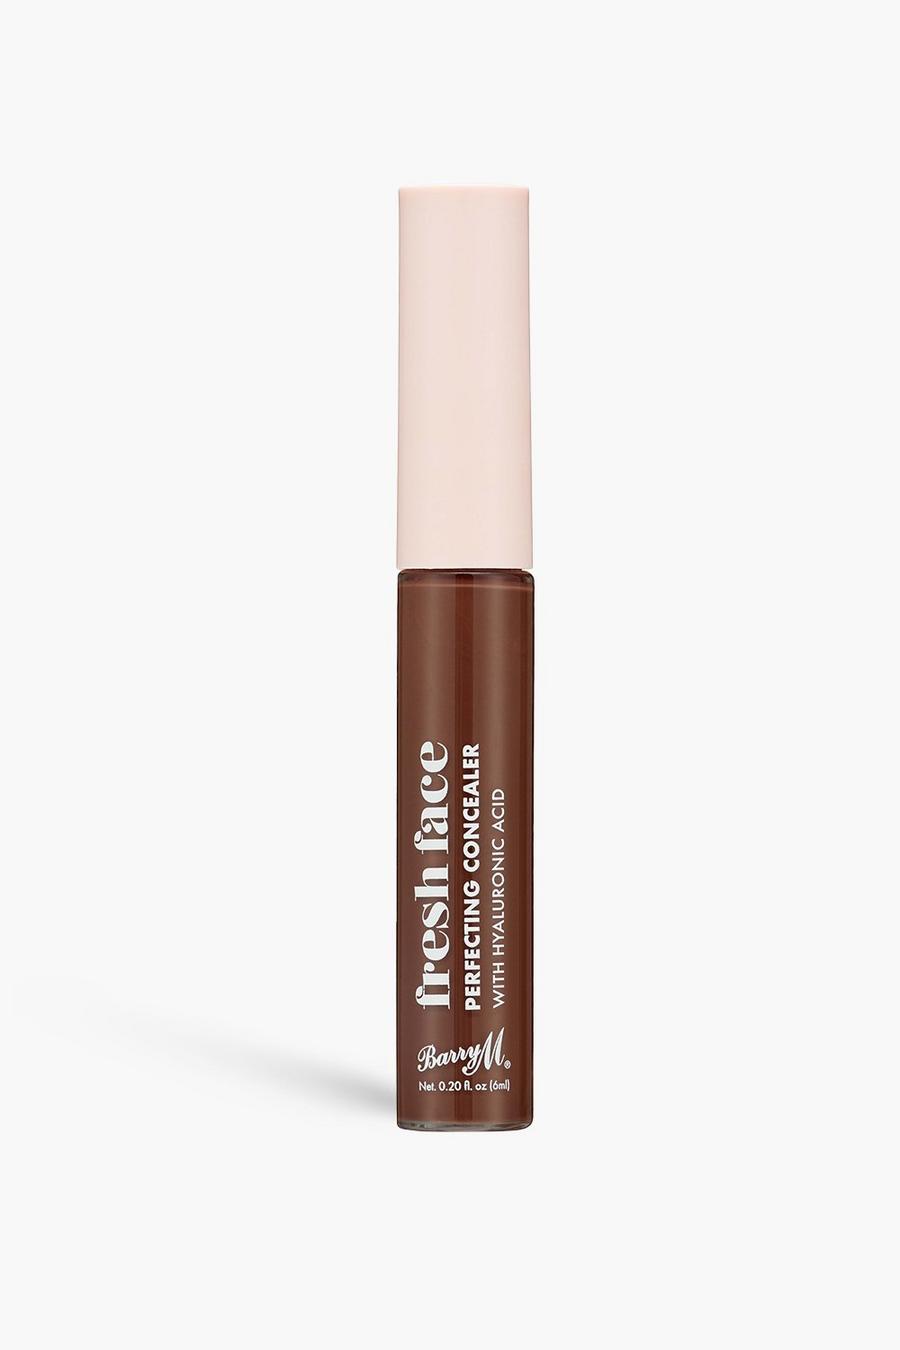 Brown brun Barry M Fresh Face Perfecting Concealer 20